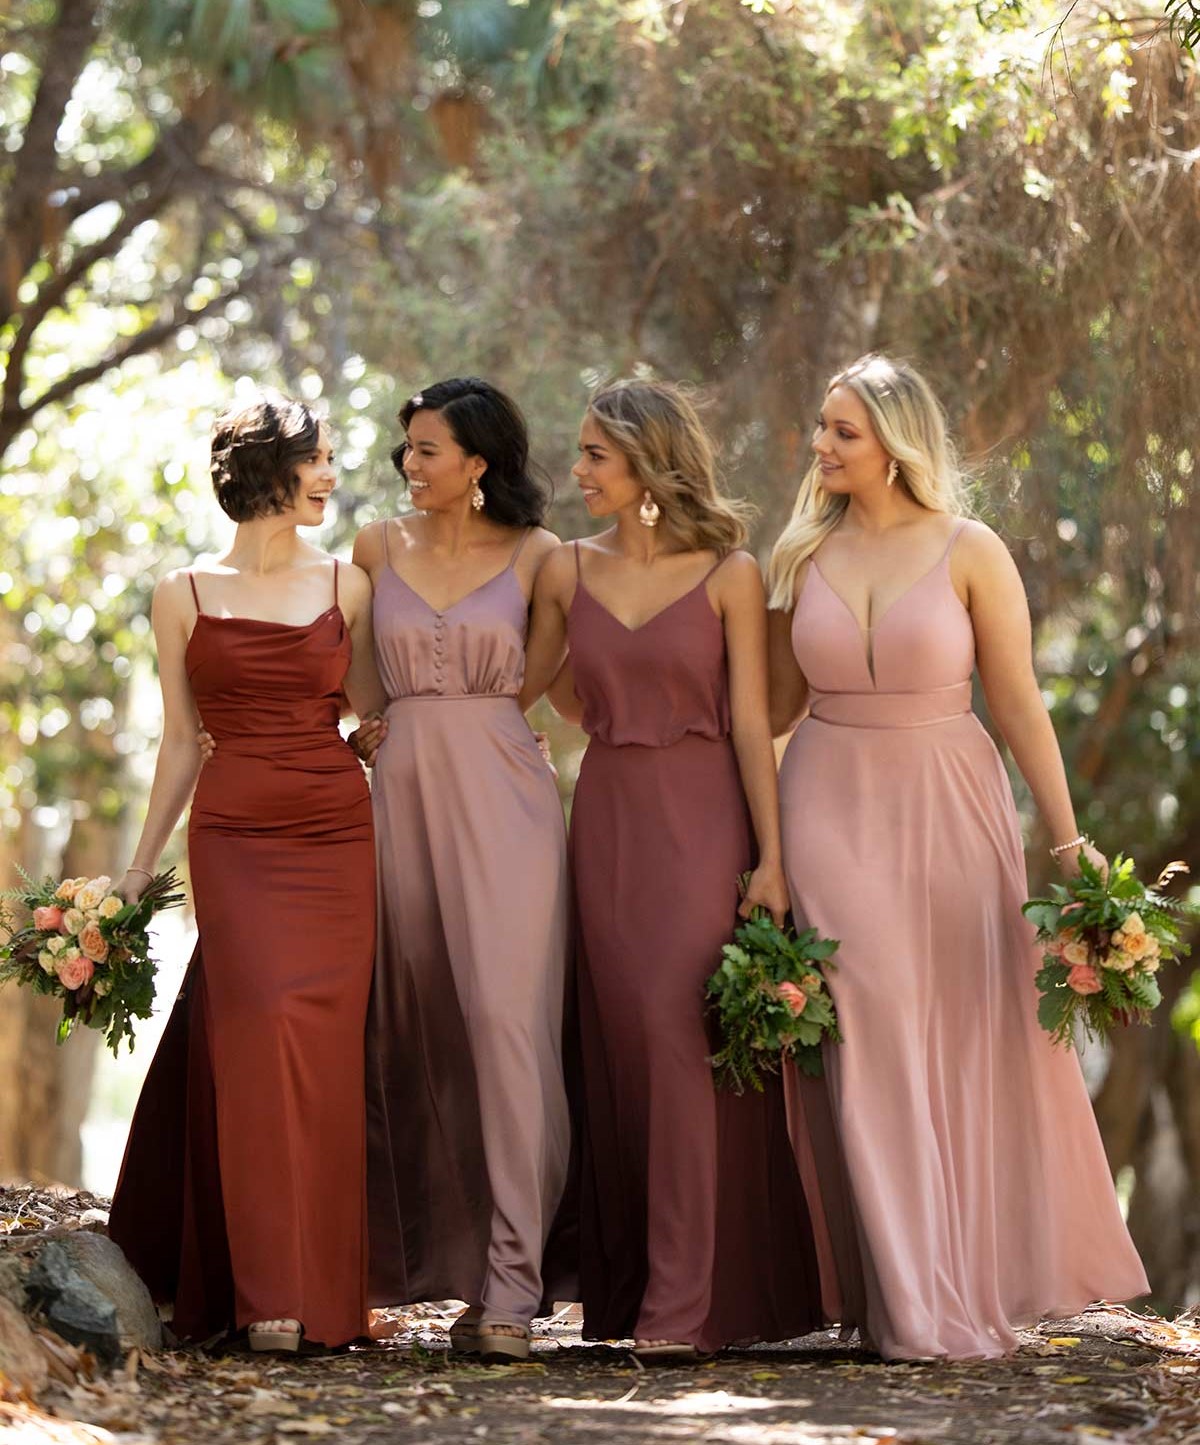 Autumnal Bridesmaid Dresses To Fall For ...